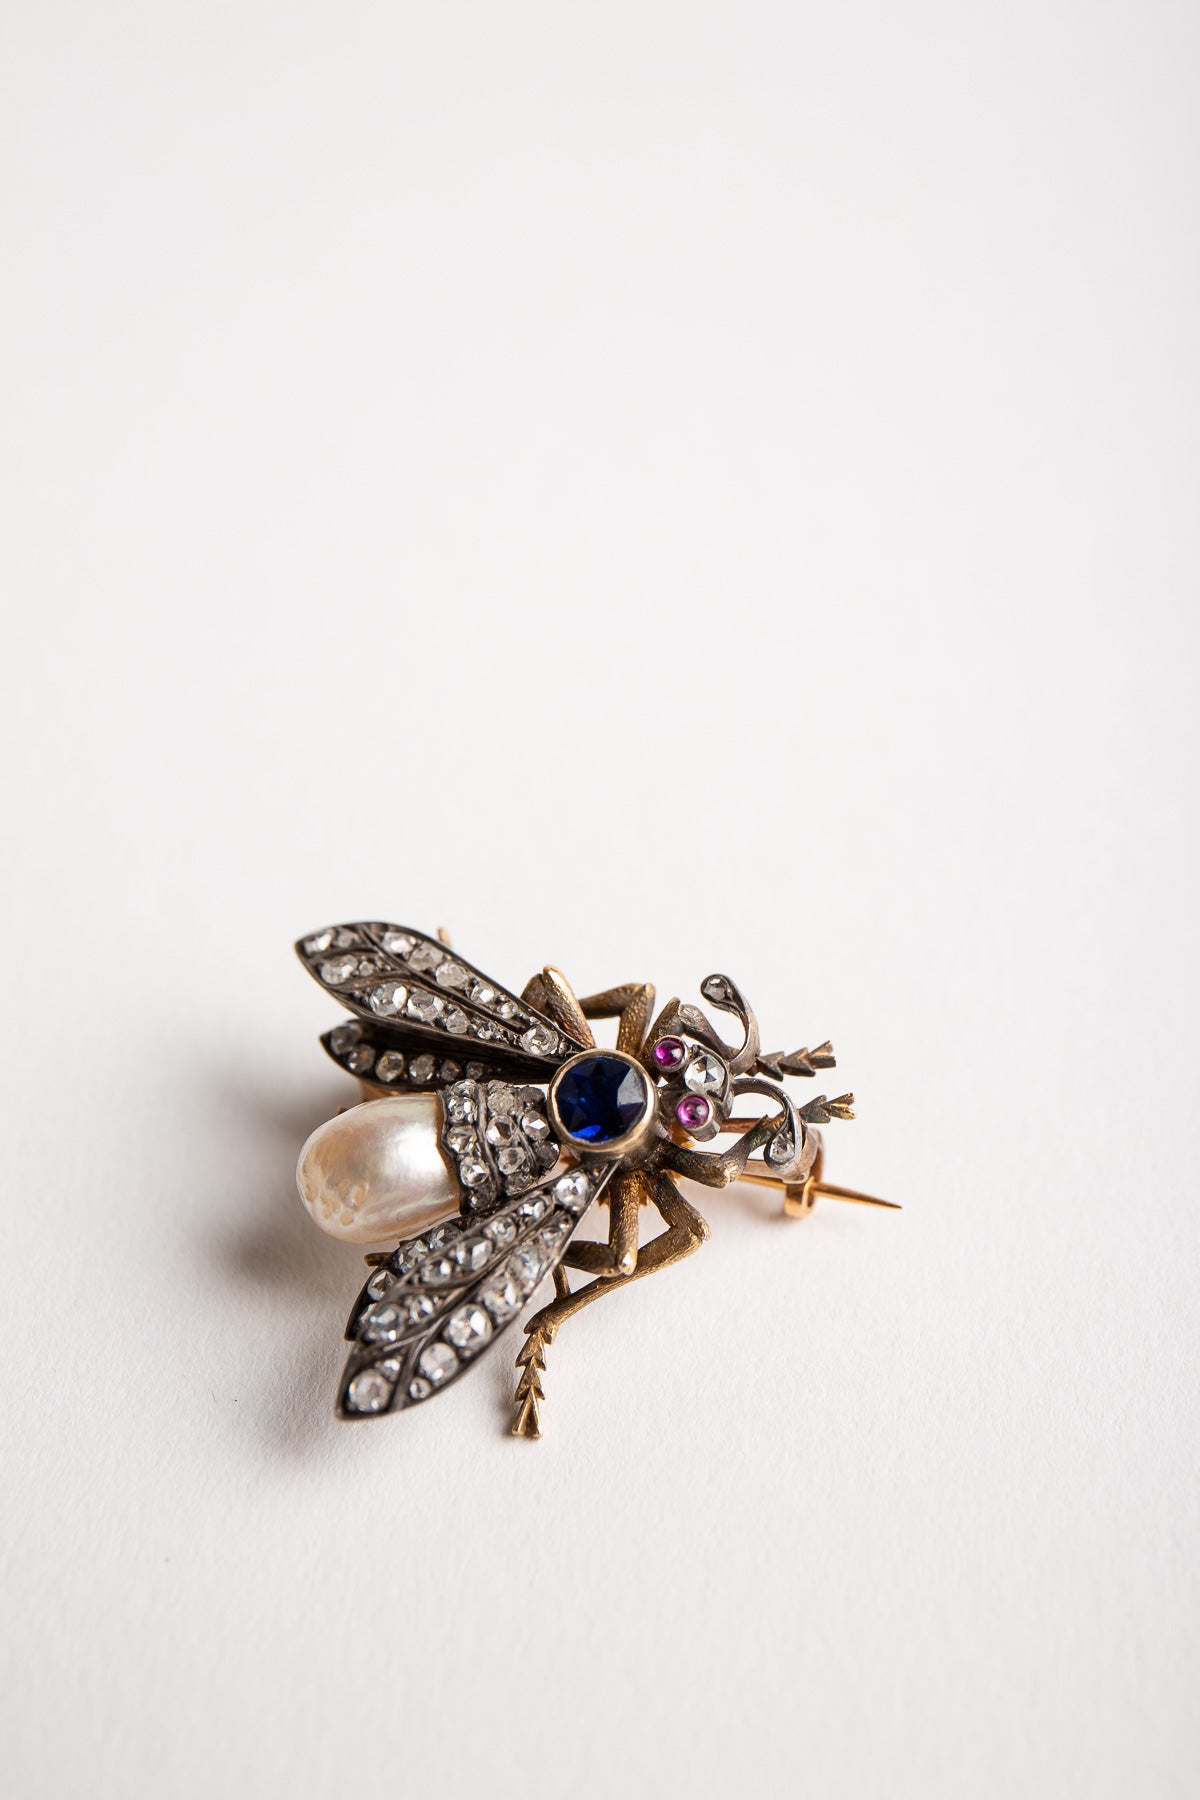 MAXFIELD PRIVATE COLLECTION | PEARL DIAMOND FLY PIN